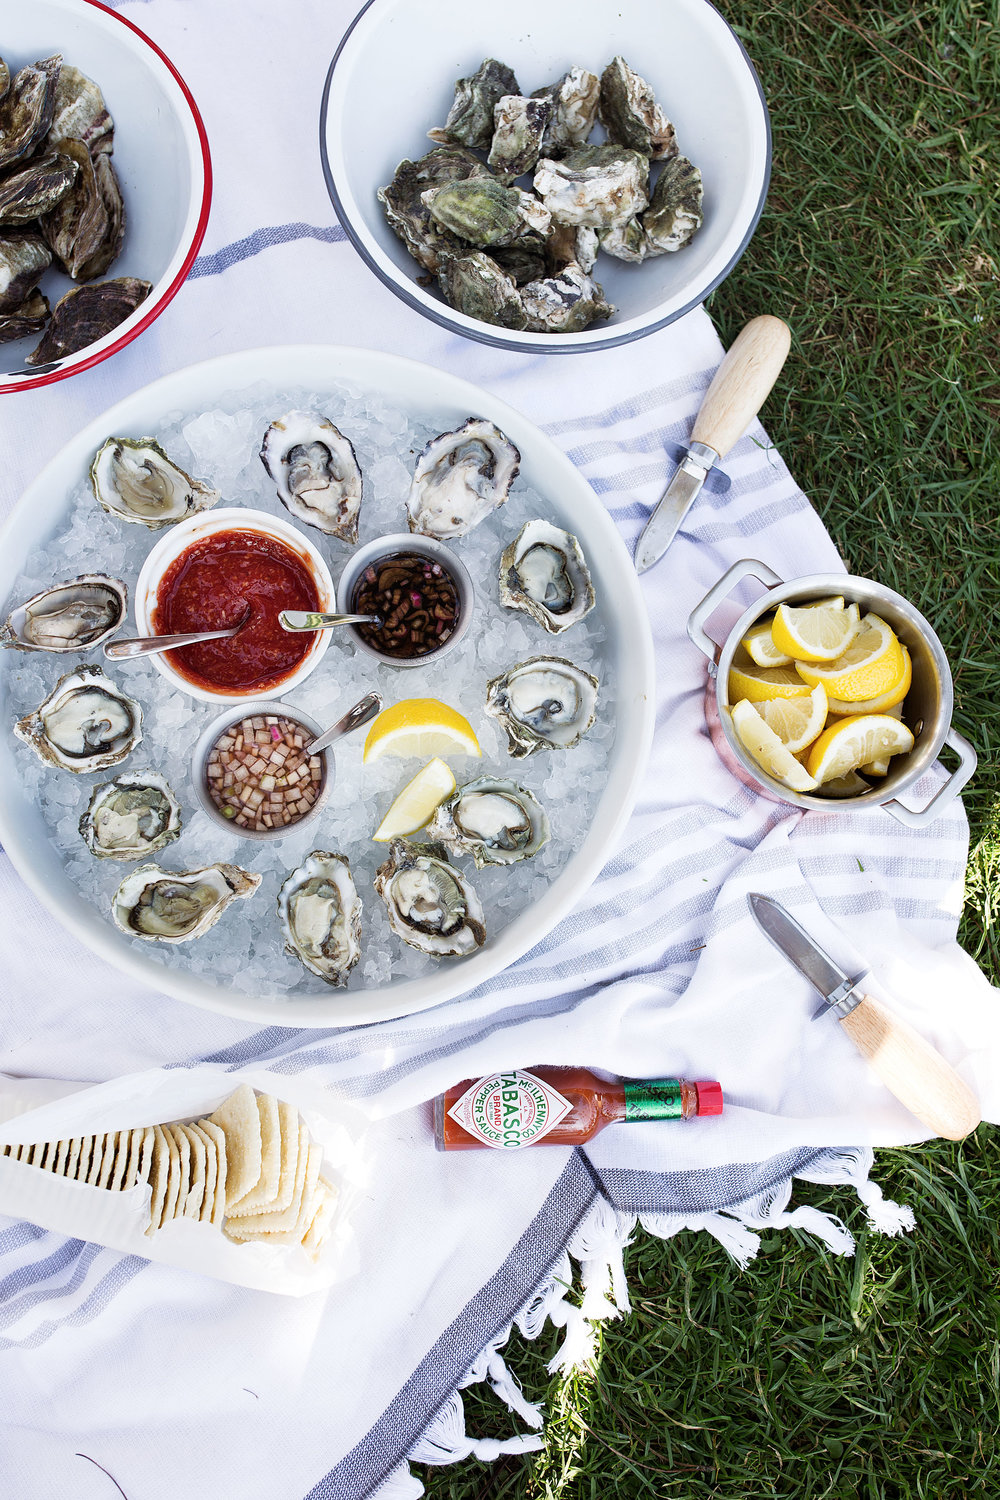 shuck yeah: all about oysters, shellfish picnic in the park